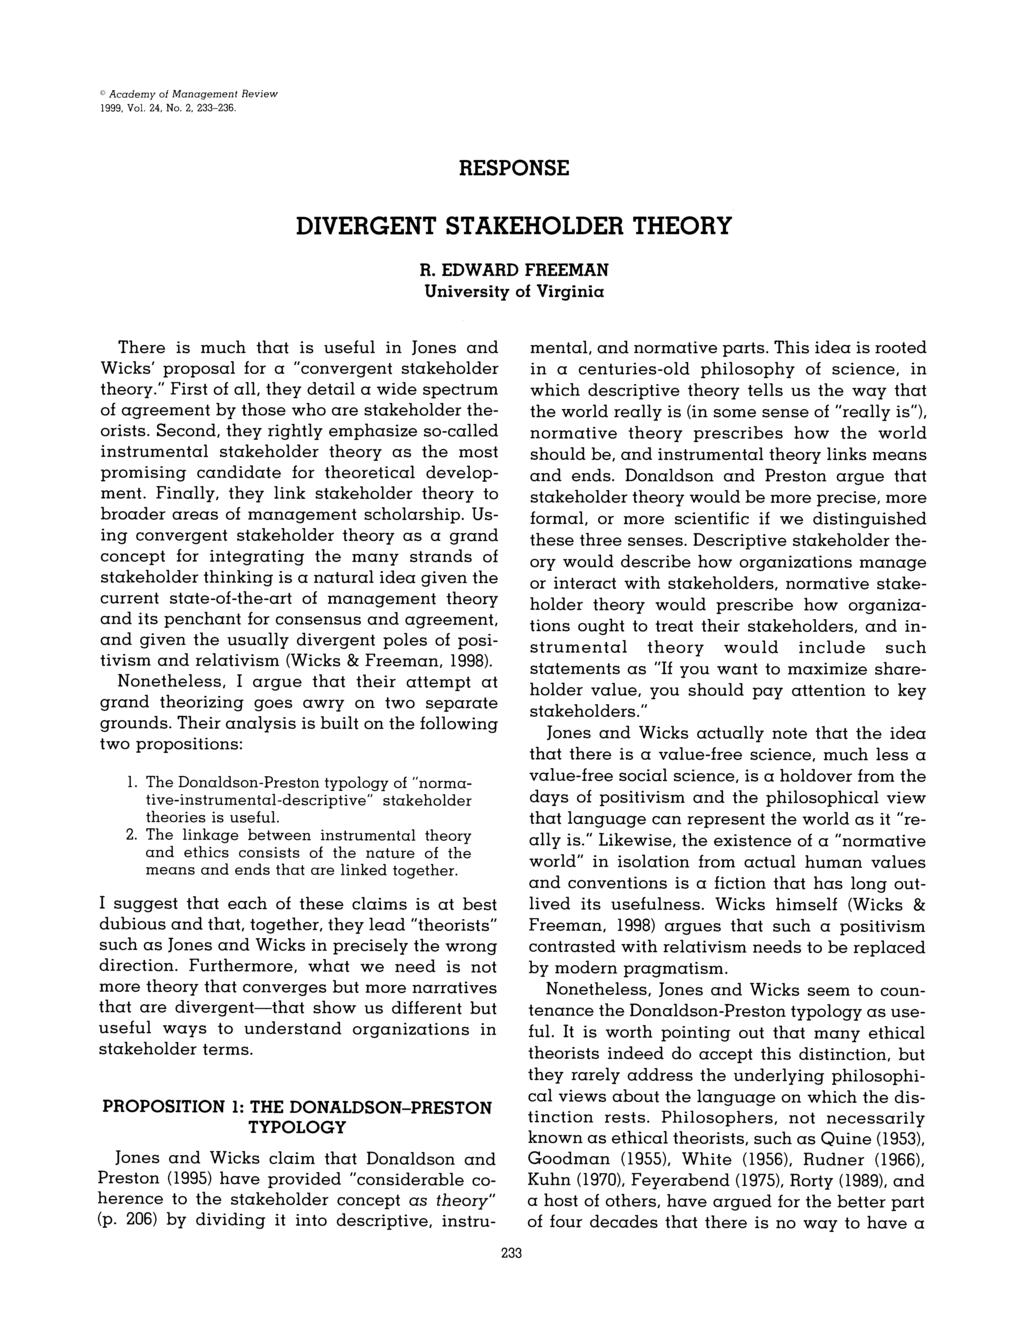 ? Academy of Management Review 1999, Vol. 24, No. 2, 233-236. RESPONSE DIVERGENT STAKEHOLDER THEORY R.